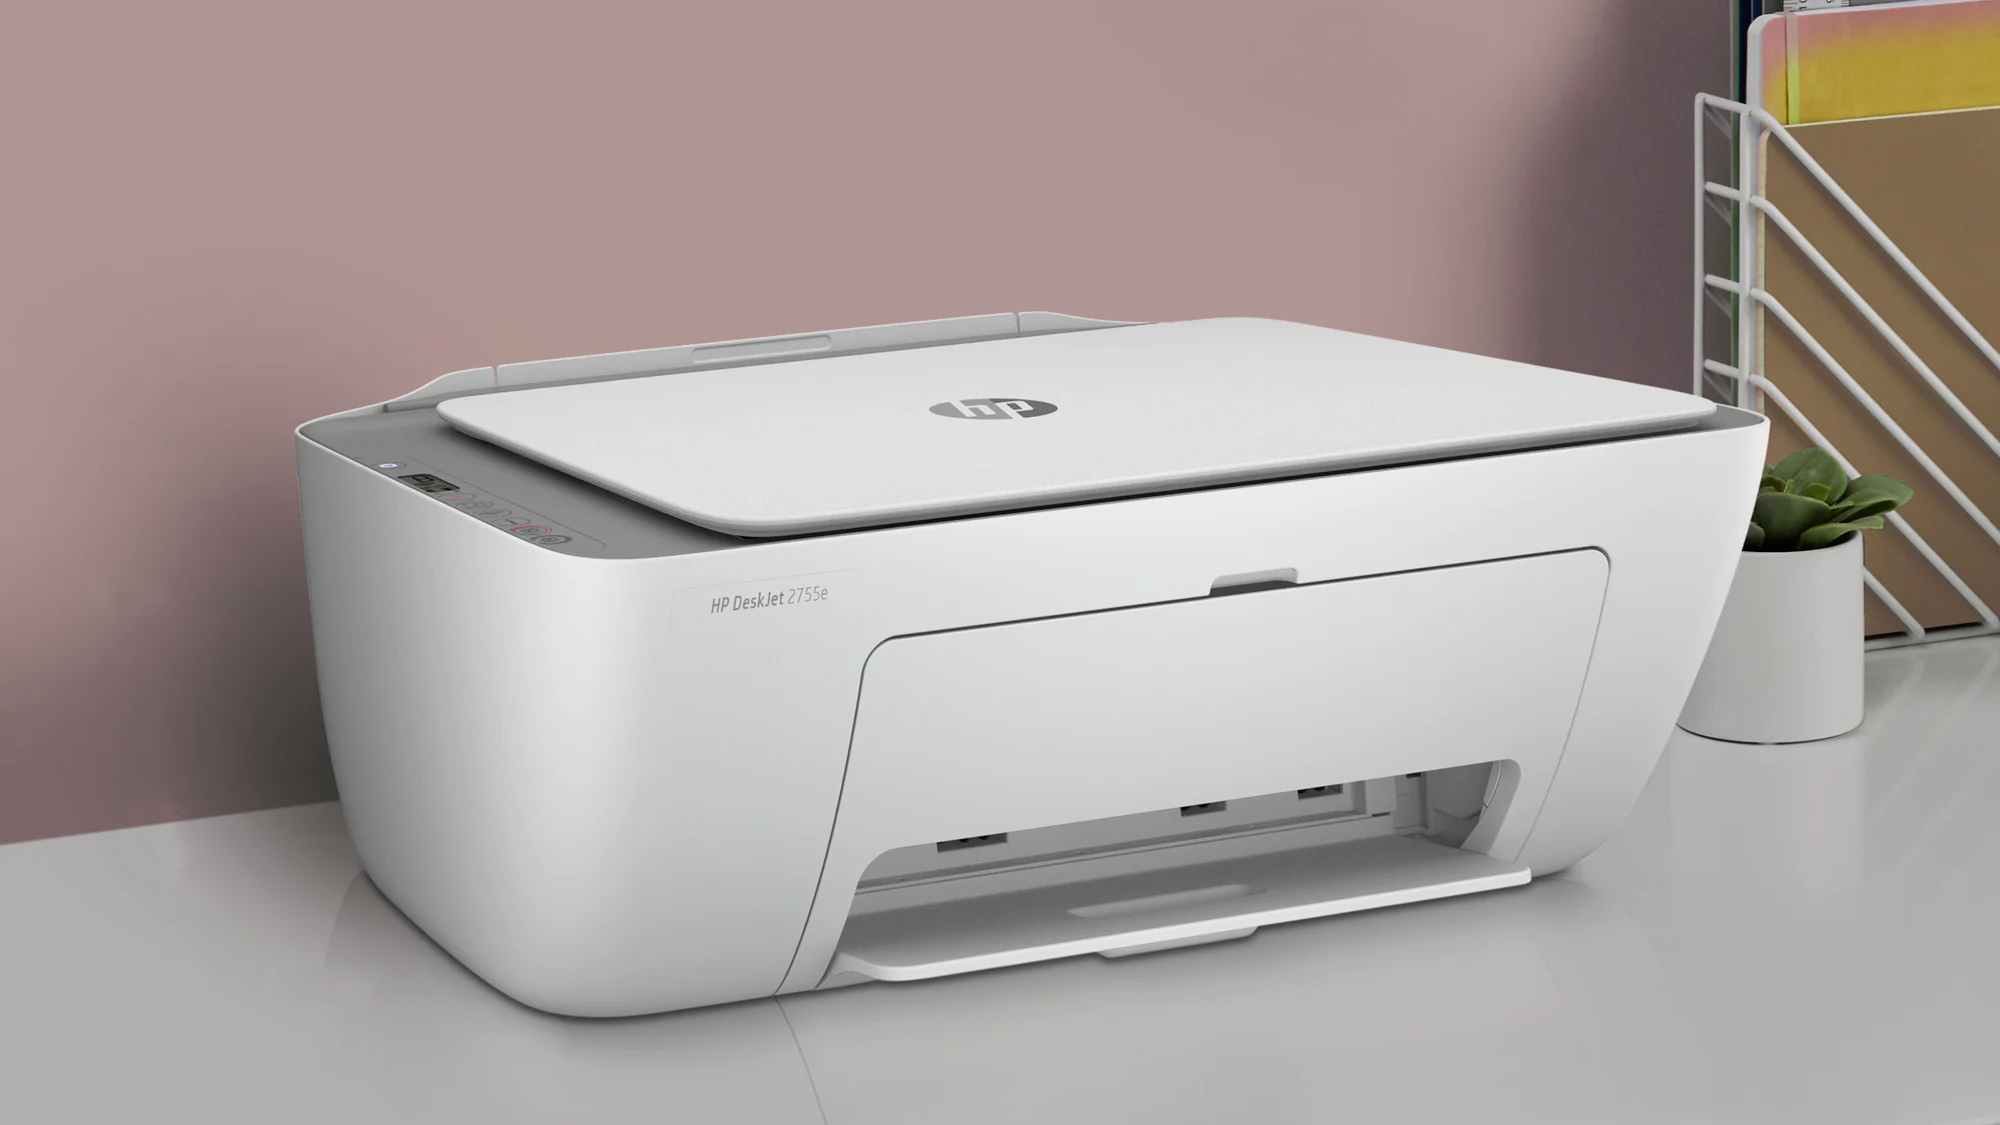 HP DeskJet 2720e Multifunctional Printer Includes 6 Months Instant Ink:  : Computer & Accessories